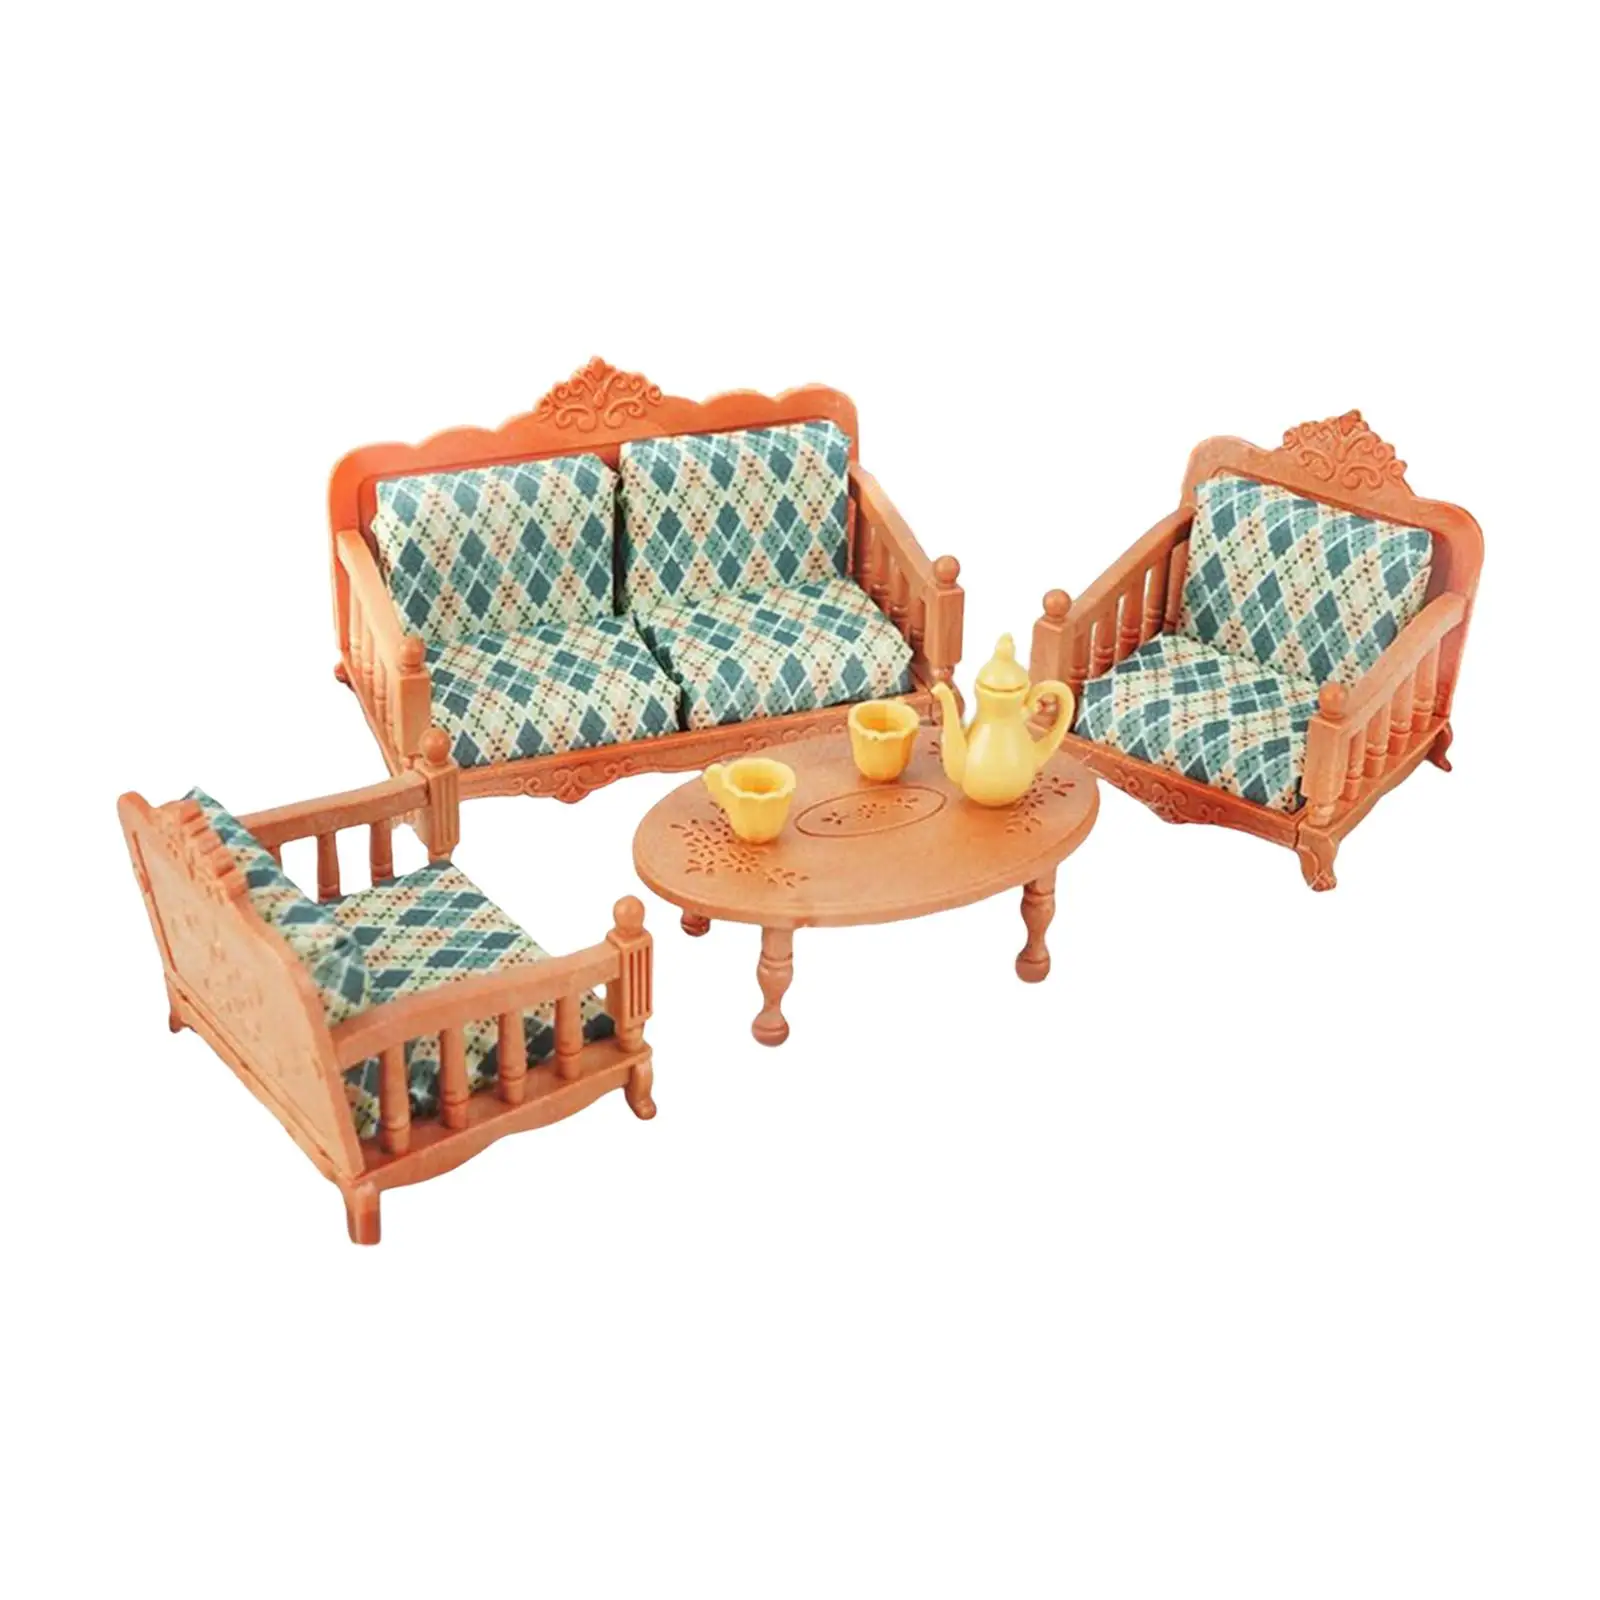 Dining Table with Chairs 1:12 Scale Wooden Doll House Furniture toy for Dolls House